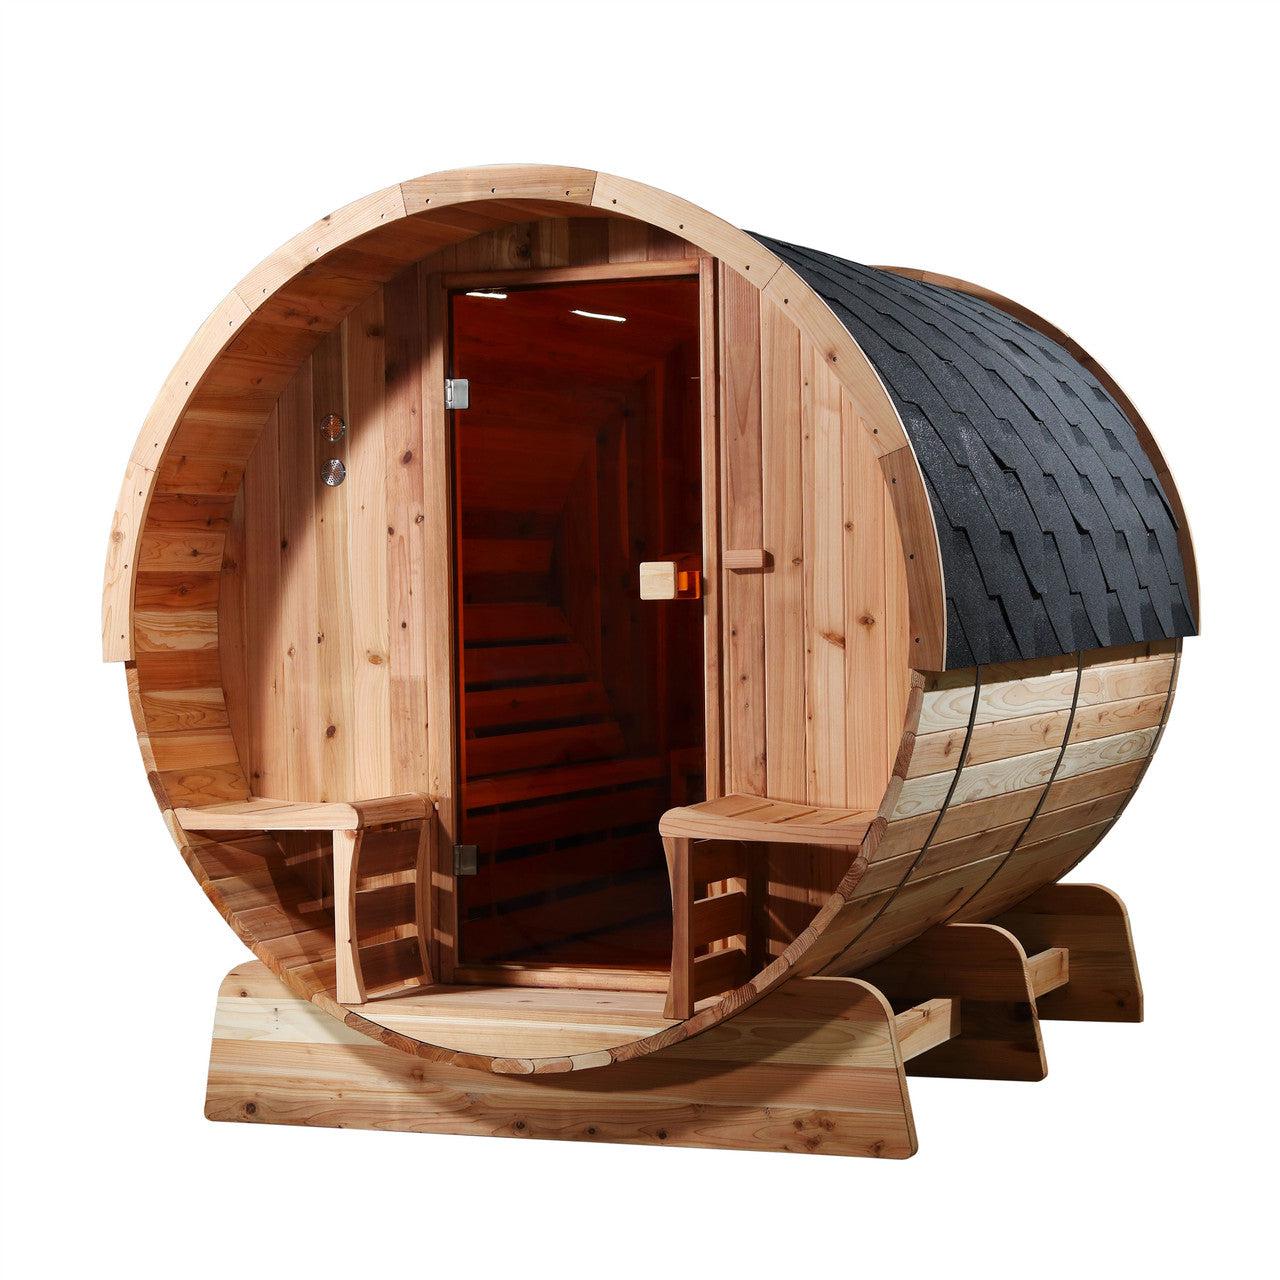 ALEKO Outdoor Rustic Cedar 6 Person Barrel Steam Sauna With Heater -Front Porch Canopy - SB6CED-AP - Purely Relaxation